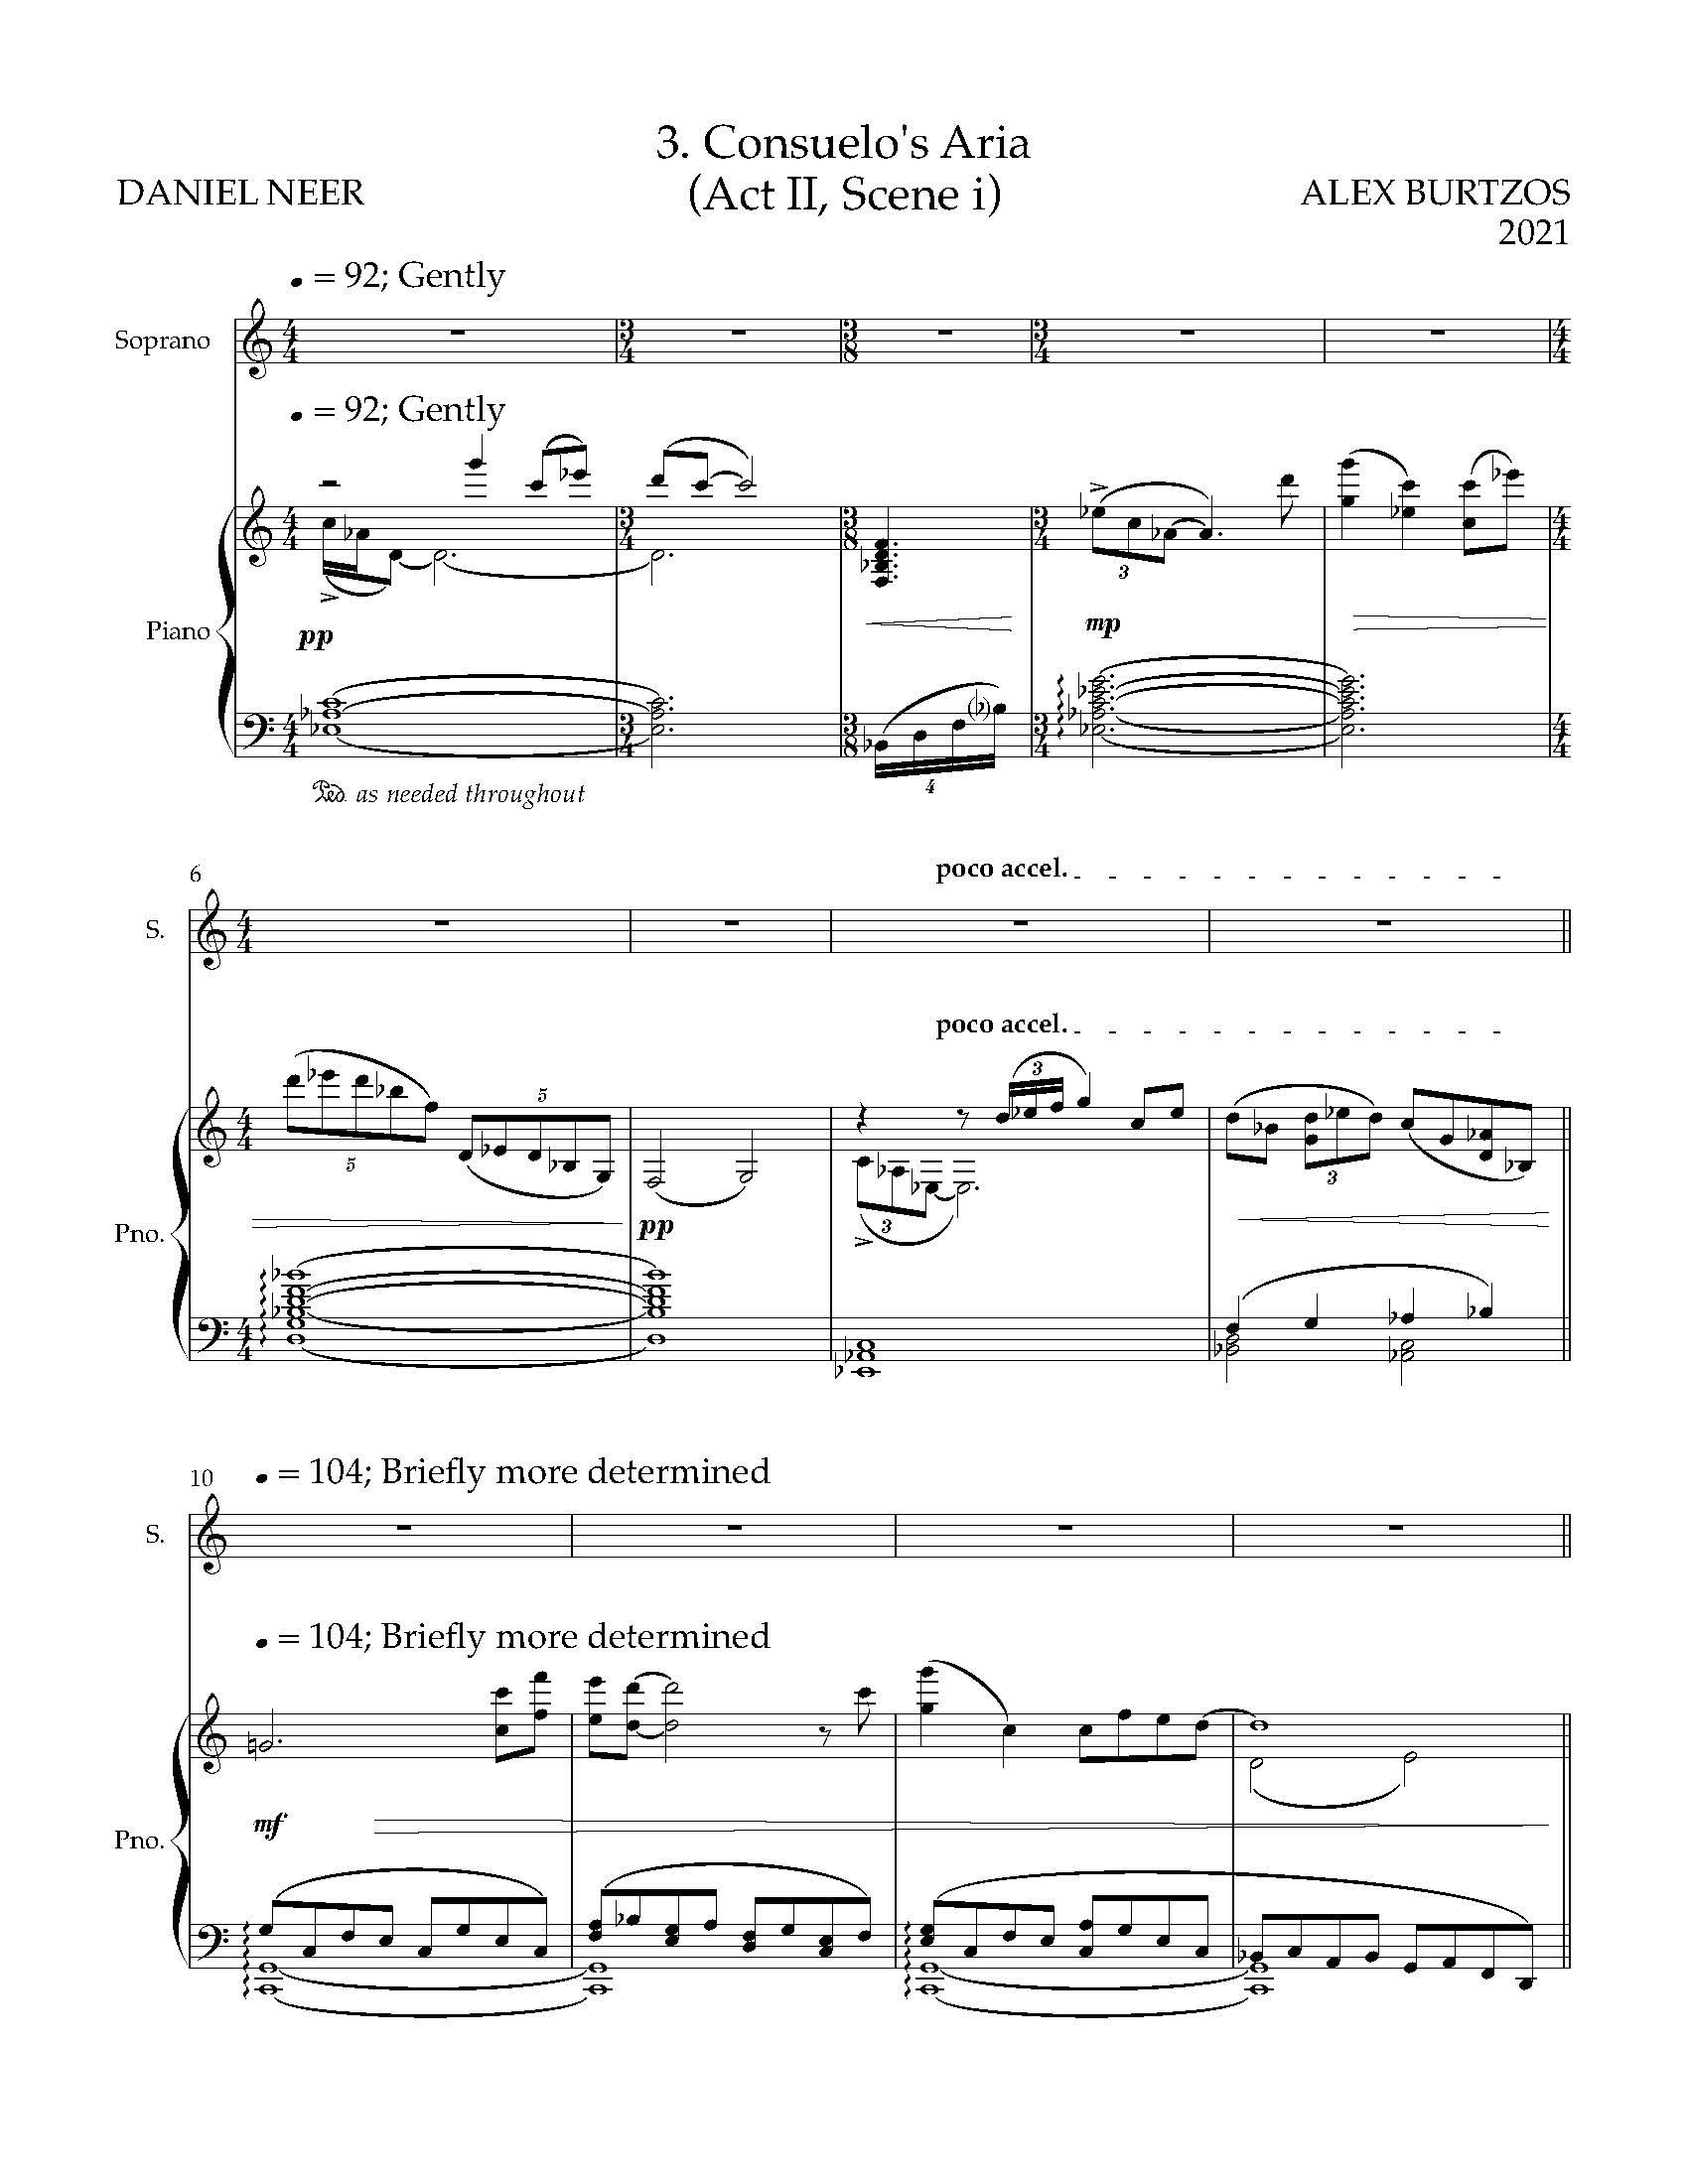 Five Arias from HWGS - Complete Score (1)_Page_15.jpg